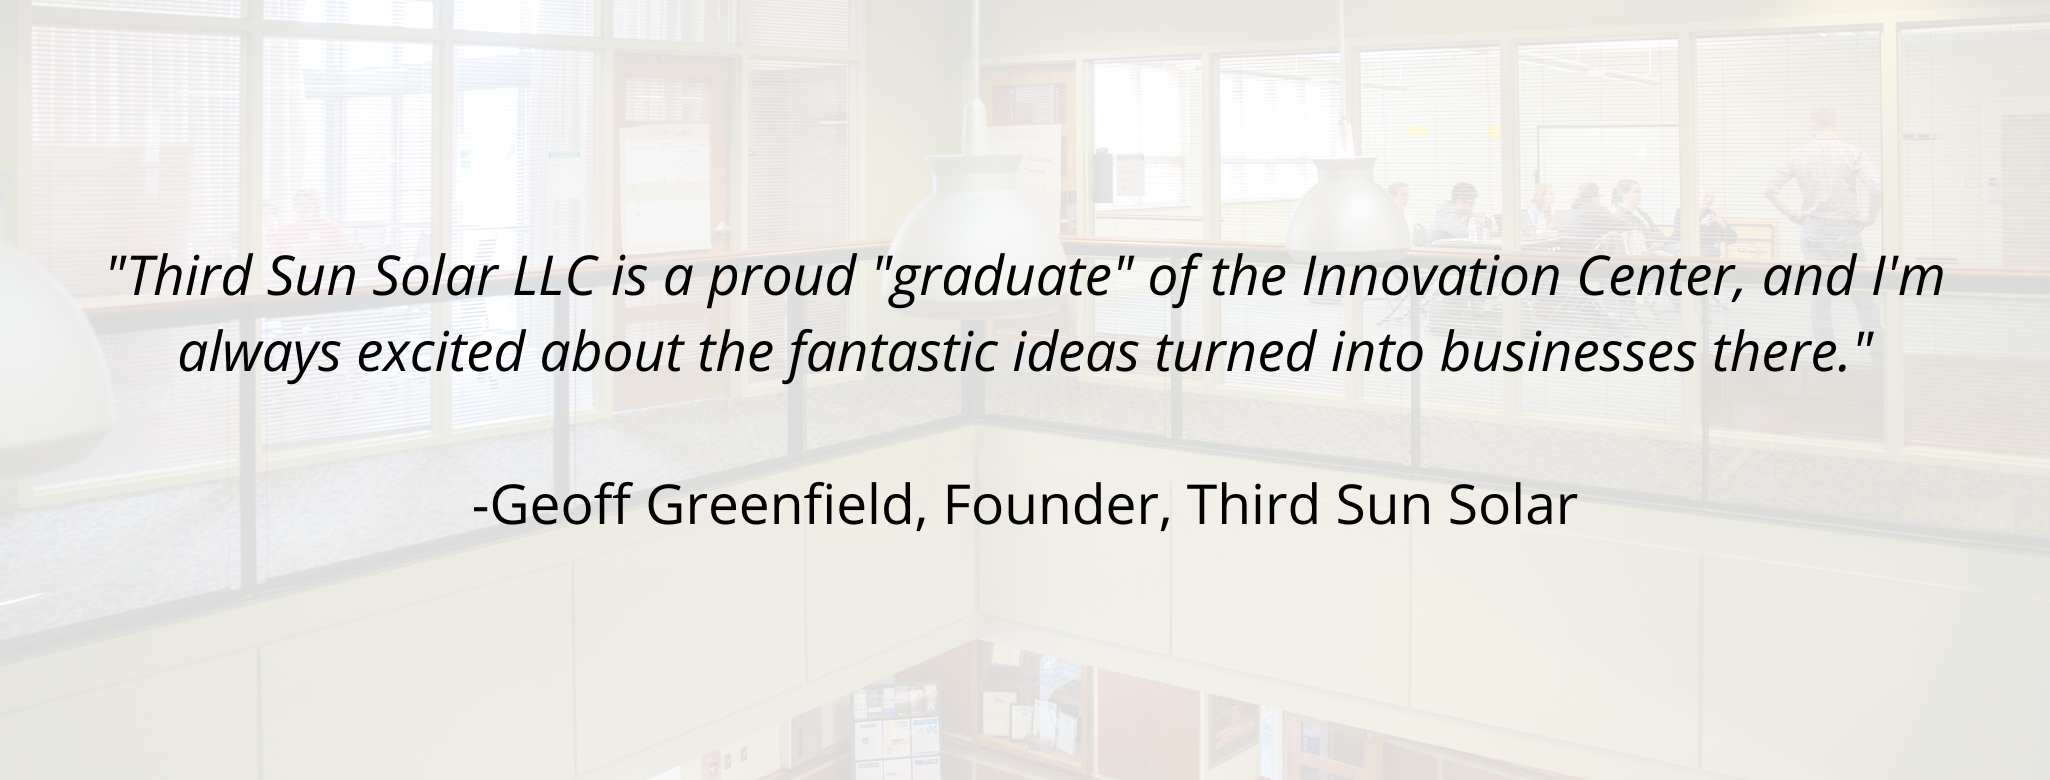 "Third Sun Solar LLC is a proud "graduate" of the Innovation Center, and I'm always excited about the fantastic ideas turned into businesses there."  Geoff Greenfield, Founder, Third Sun Solar